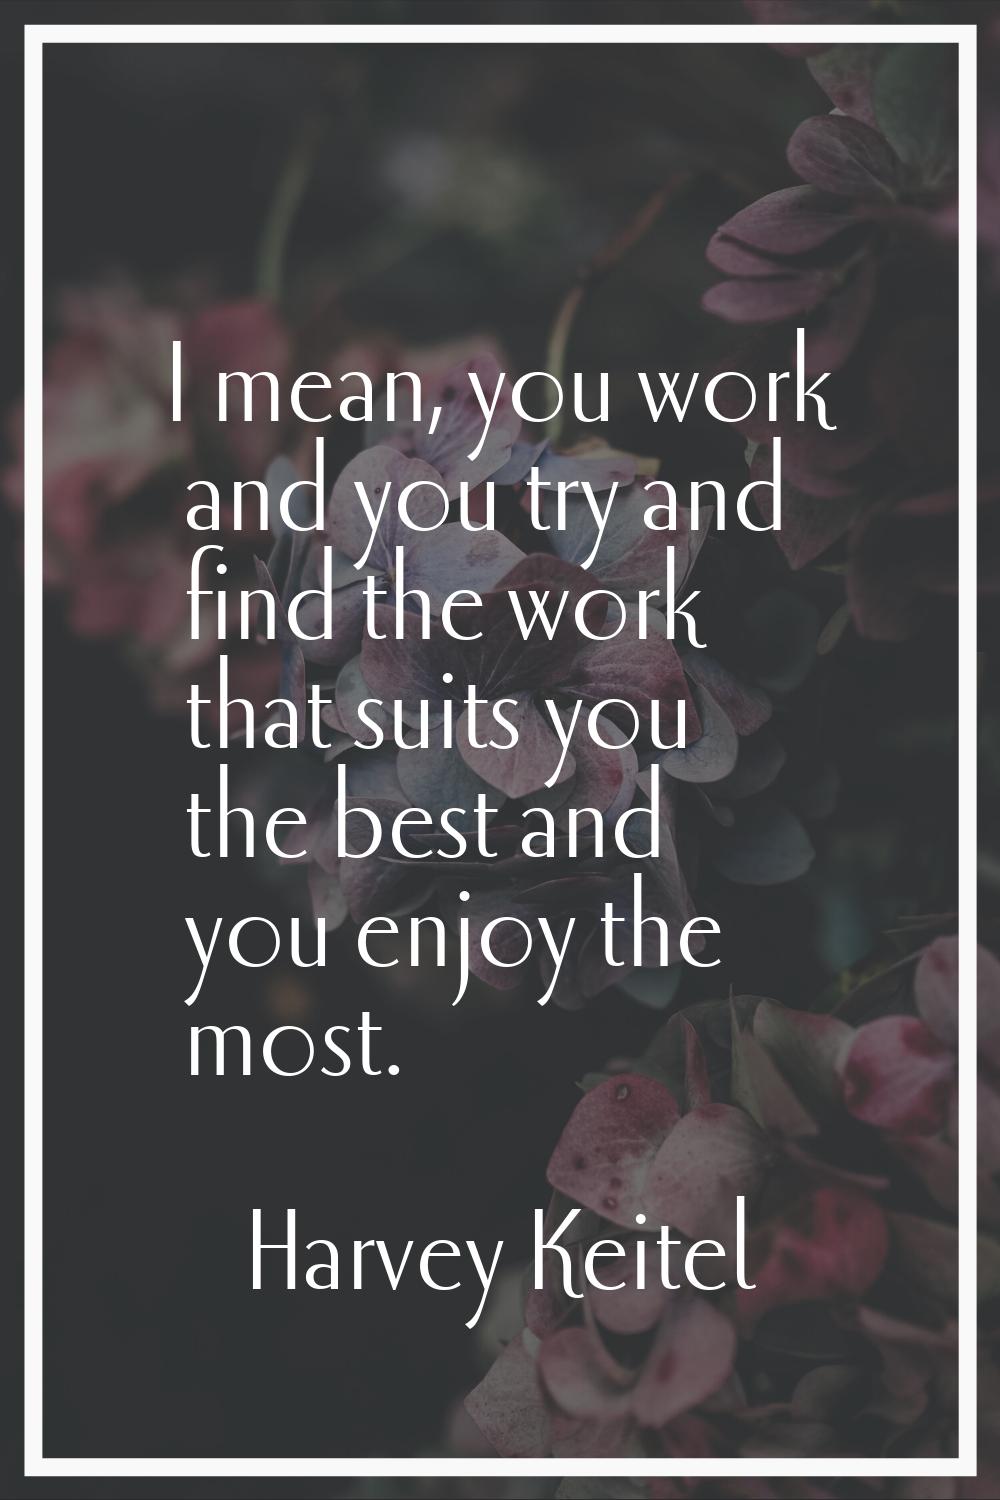 I mean, you work and you try and find the work that suits you the best and you enjoy the most.